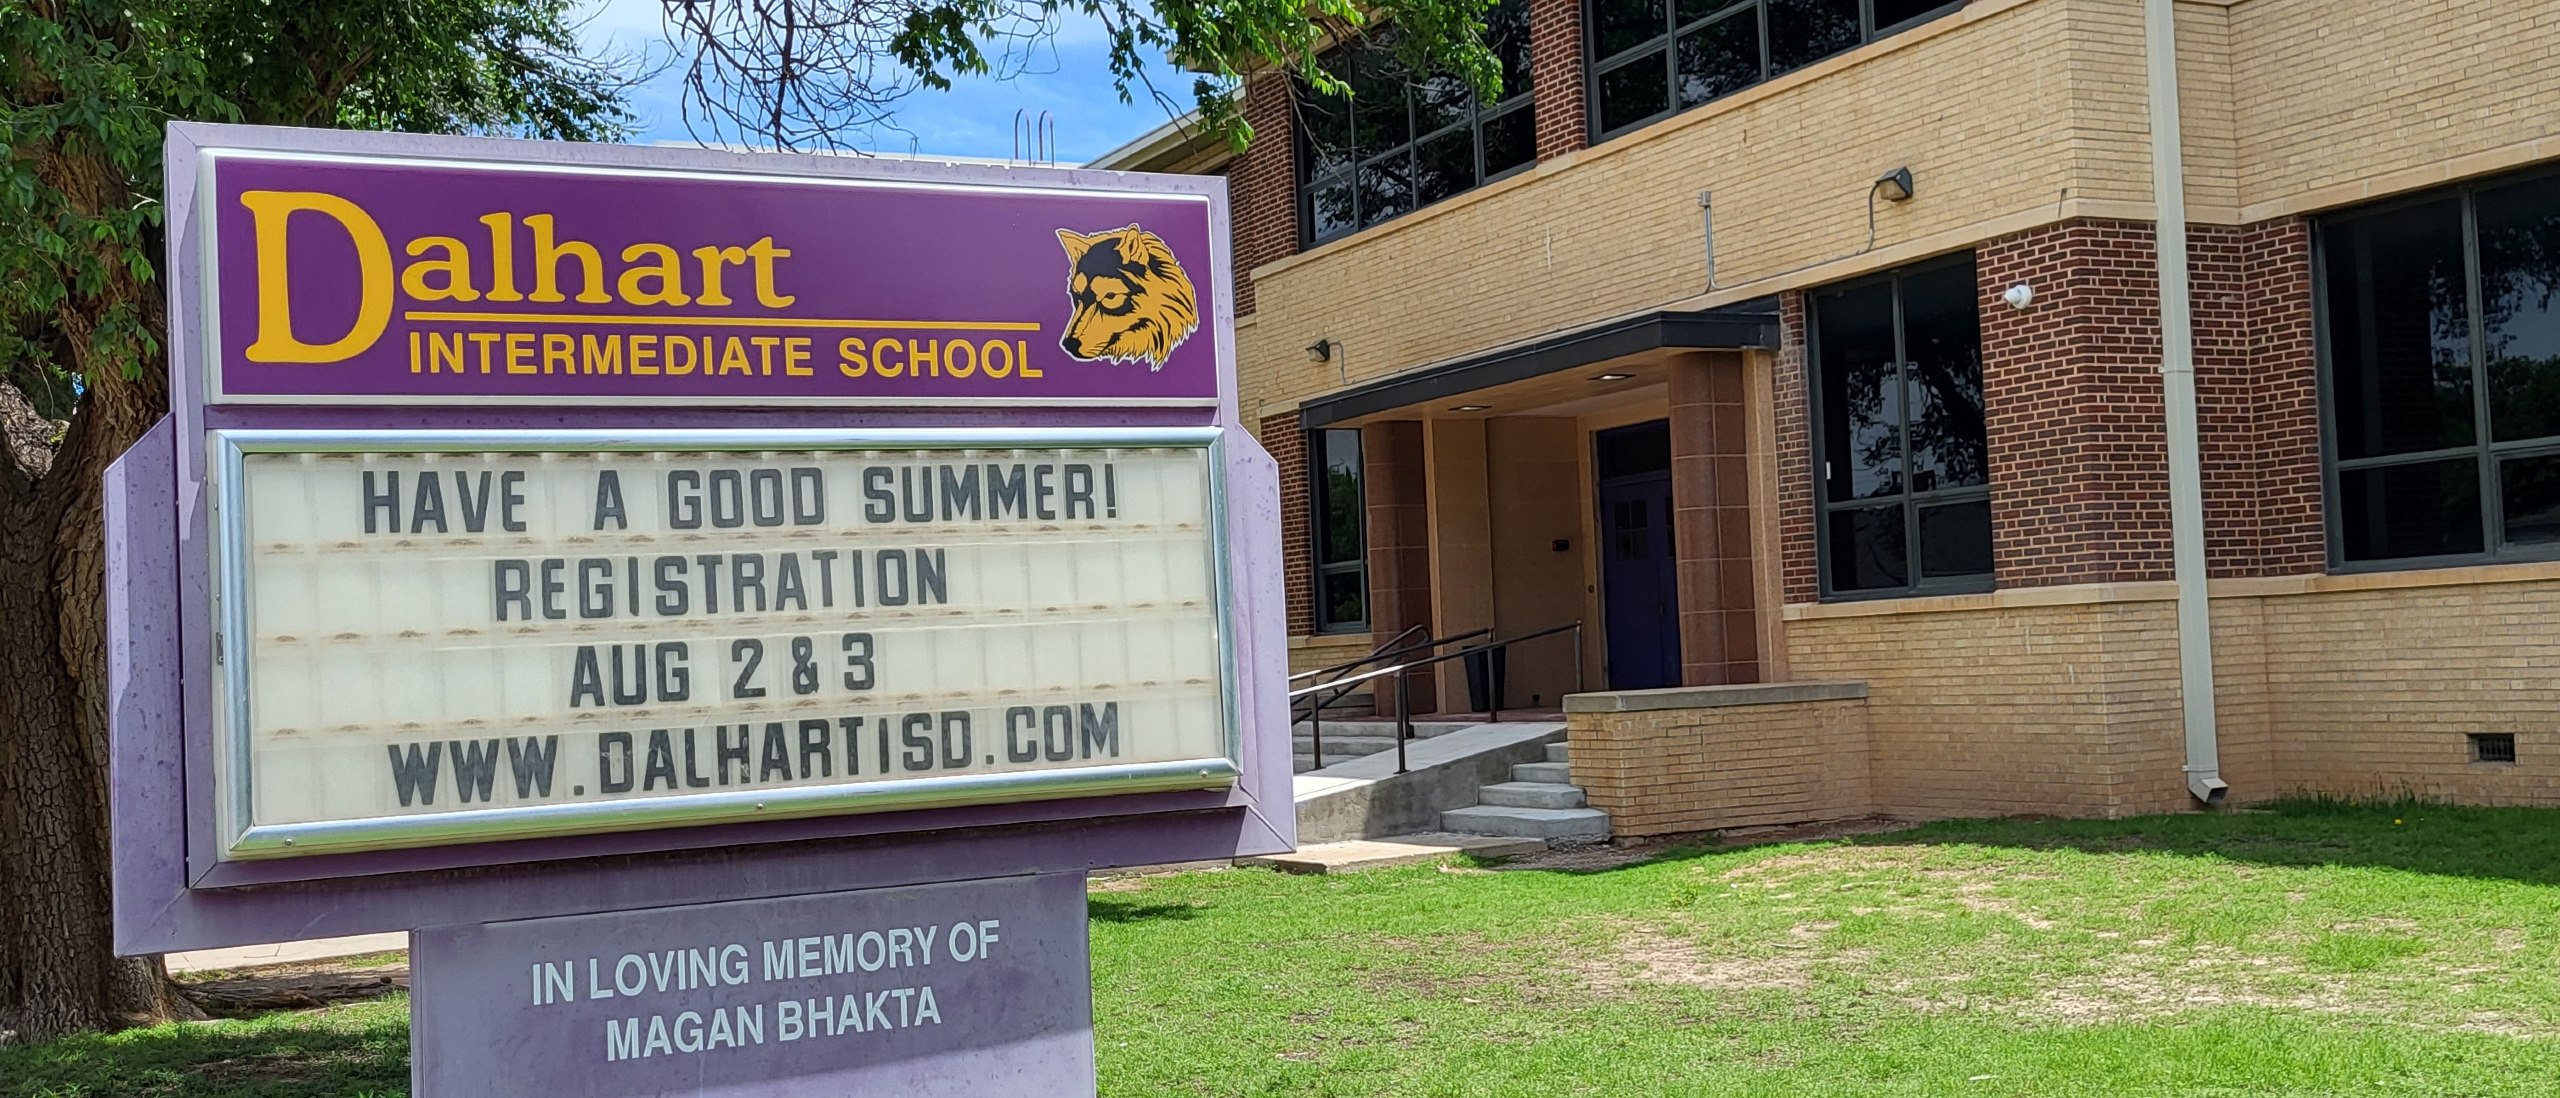 Photo of the frong of the building at Dalhart Intermediate School including the marquee that says Have a good summer! Registration August 2 & 3